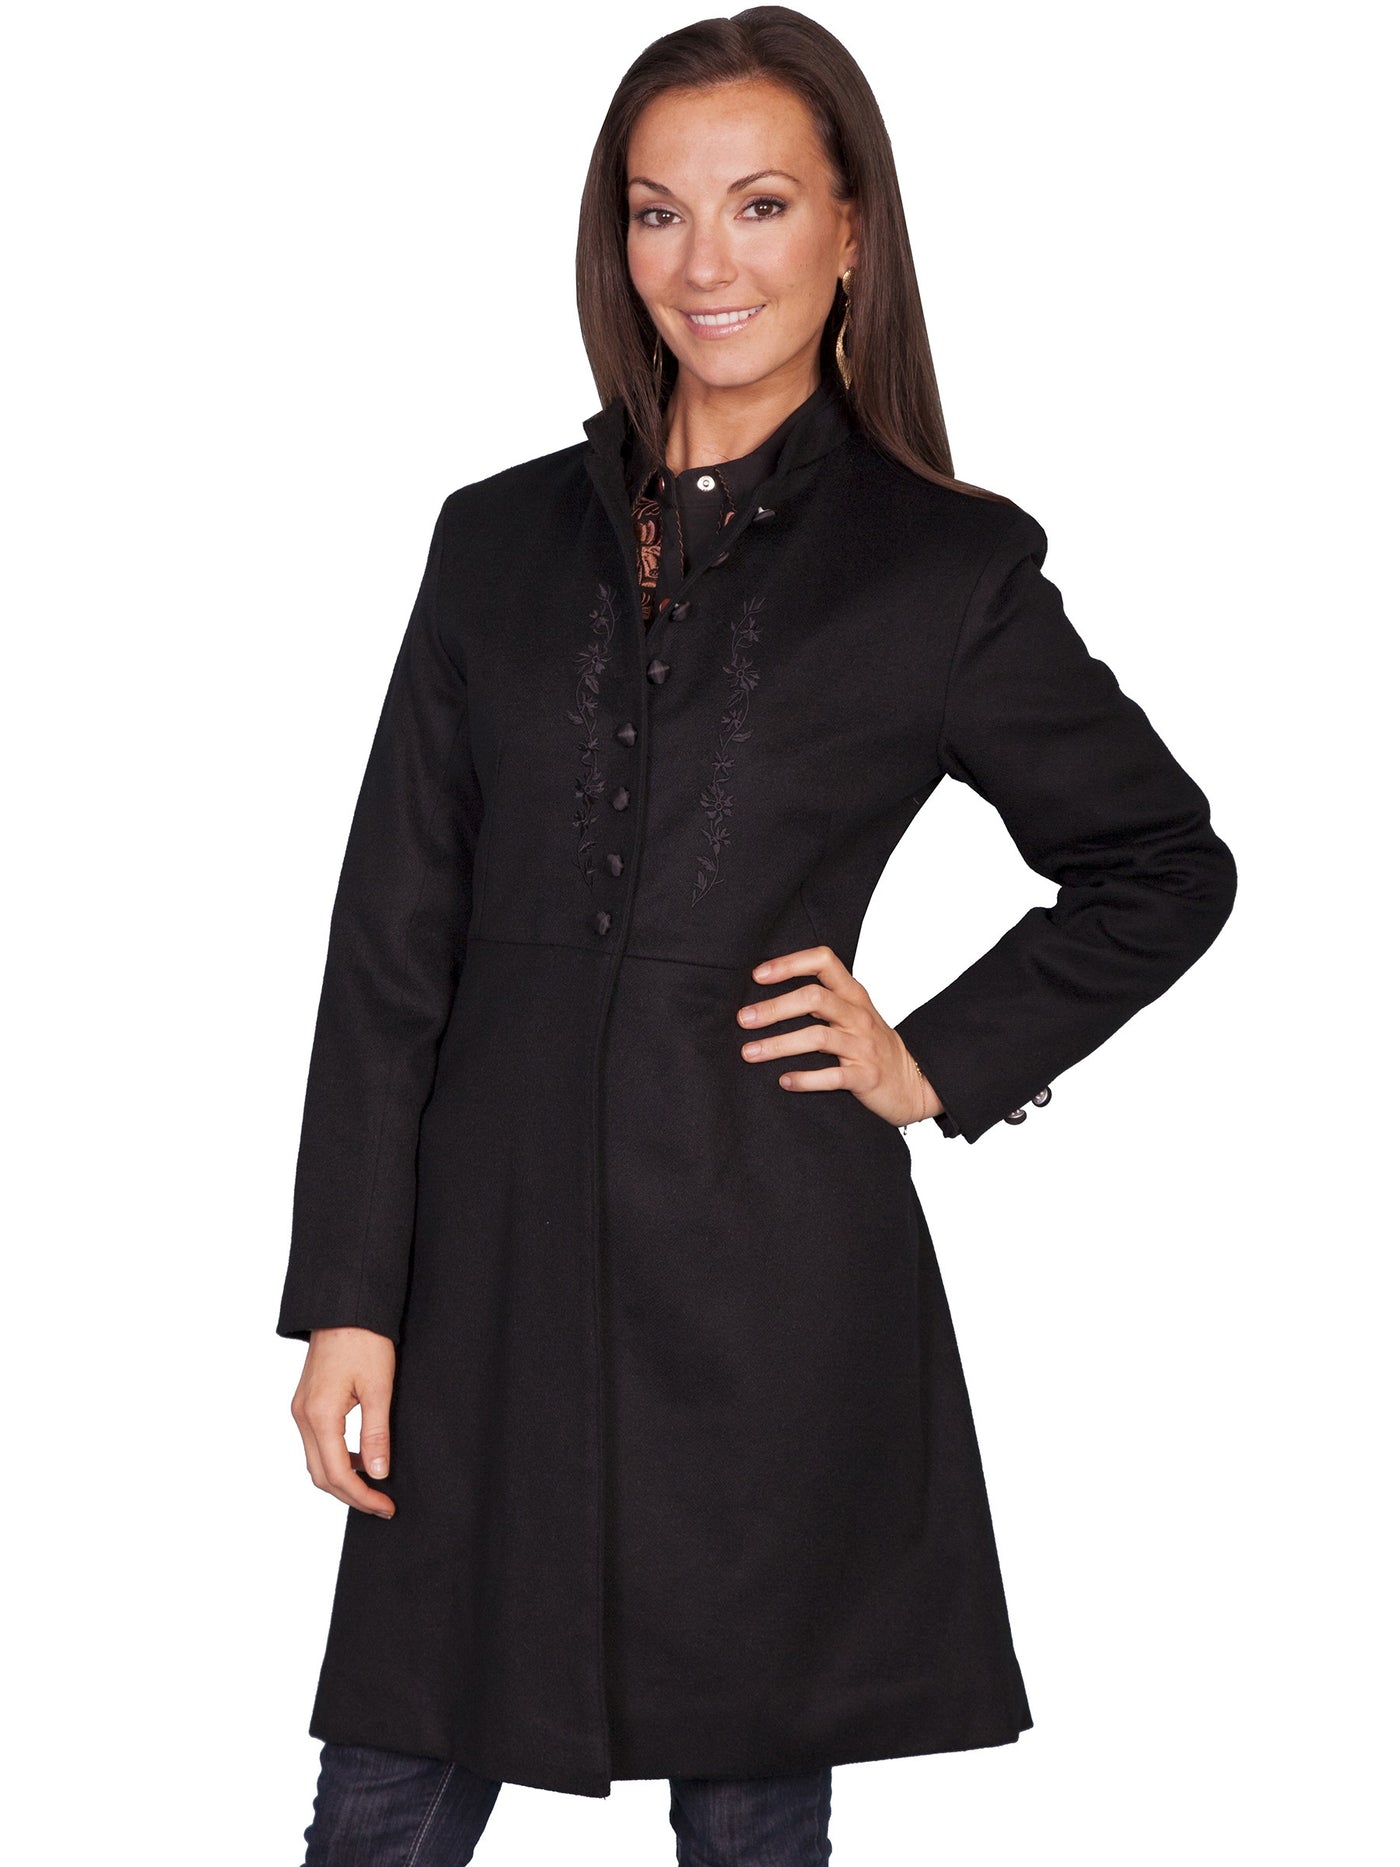 Old Western Wool Heritage Coat in Black- SOLD OUT